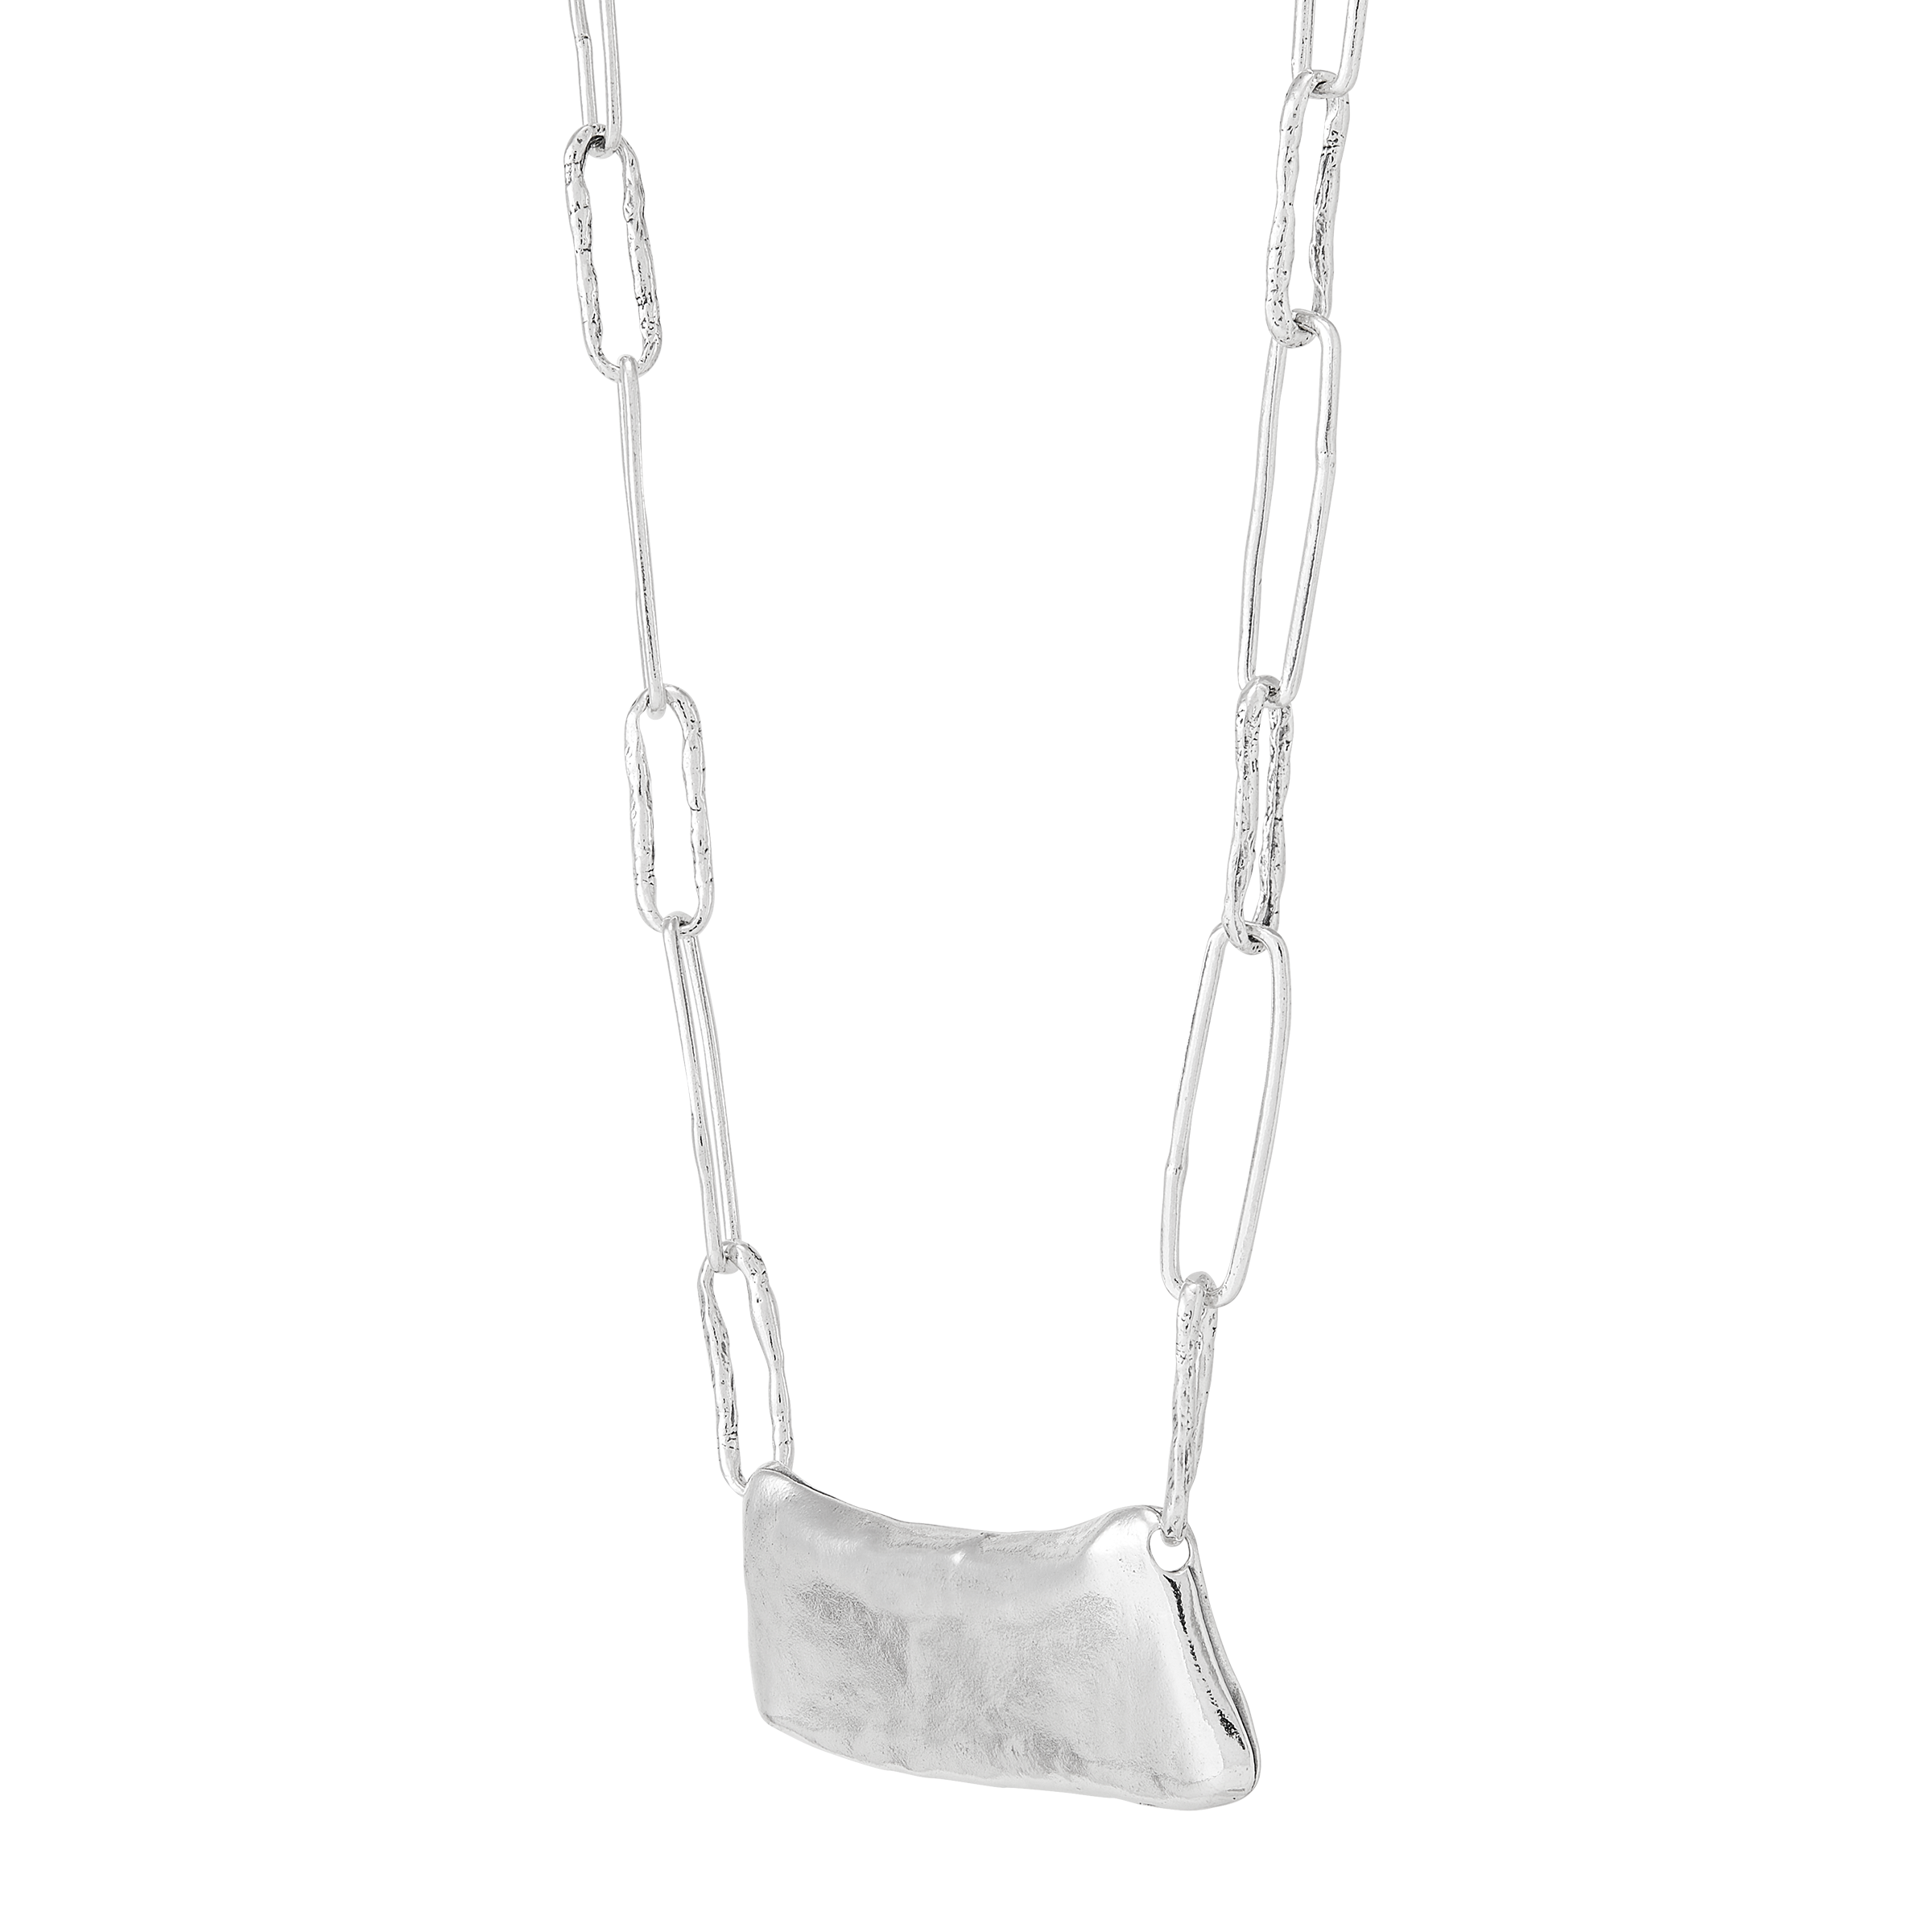 Silpada 'On The Verge' Sterling Silver Chain Necklace, 18